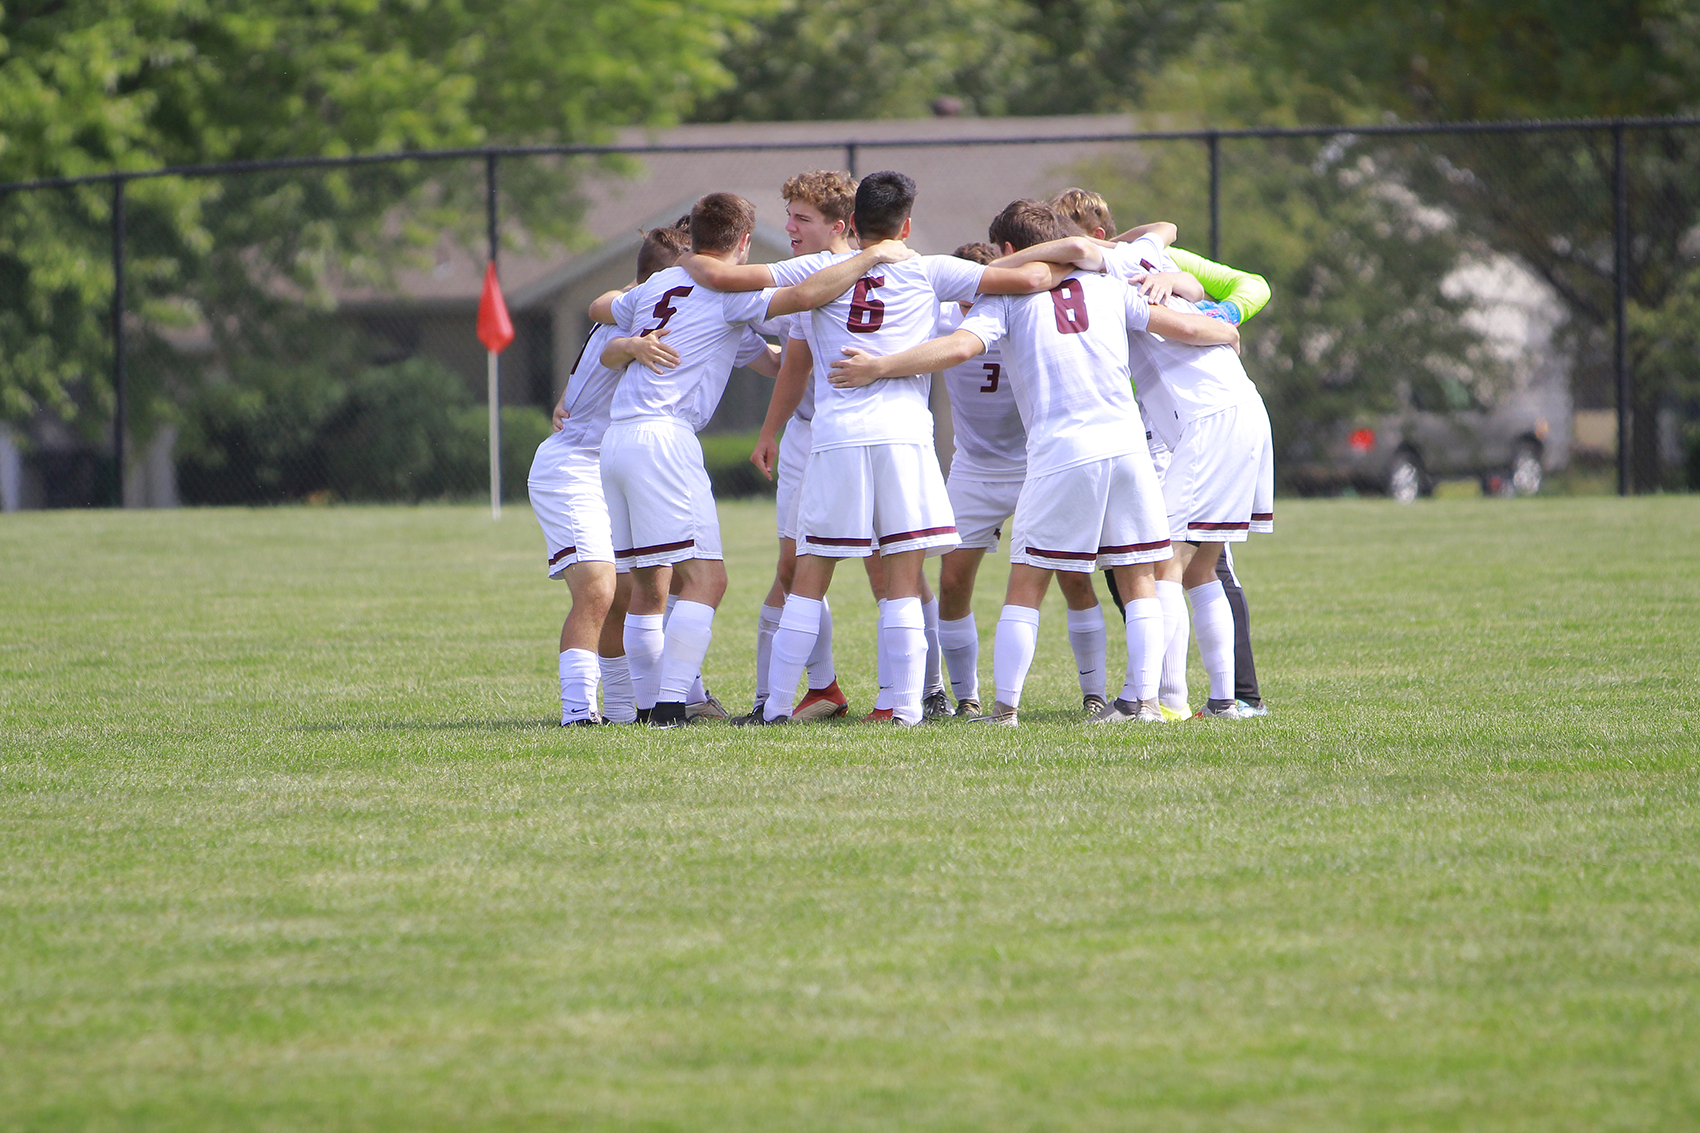 Faith defeats Union College for first win of the year